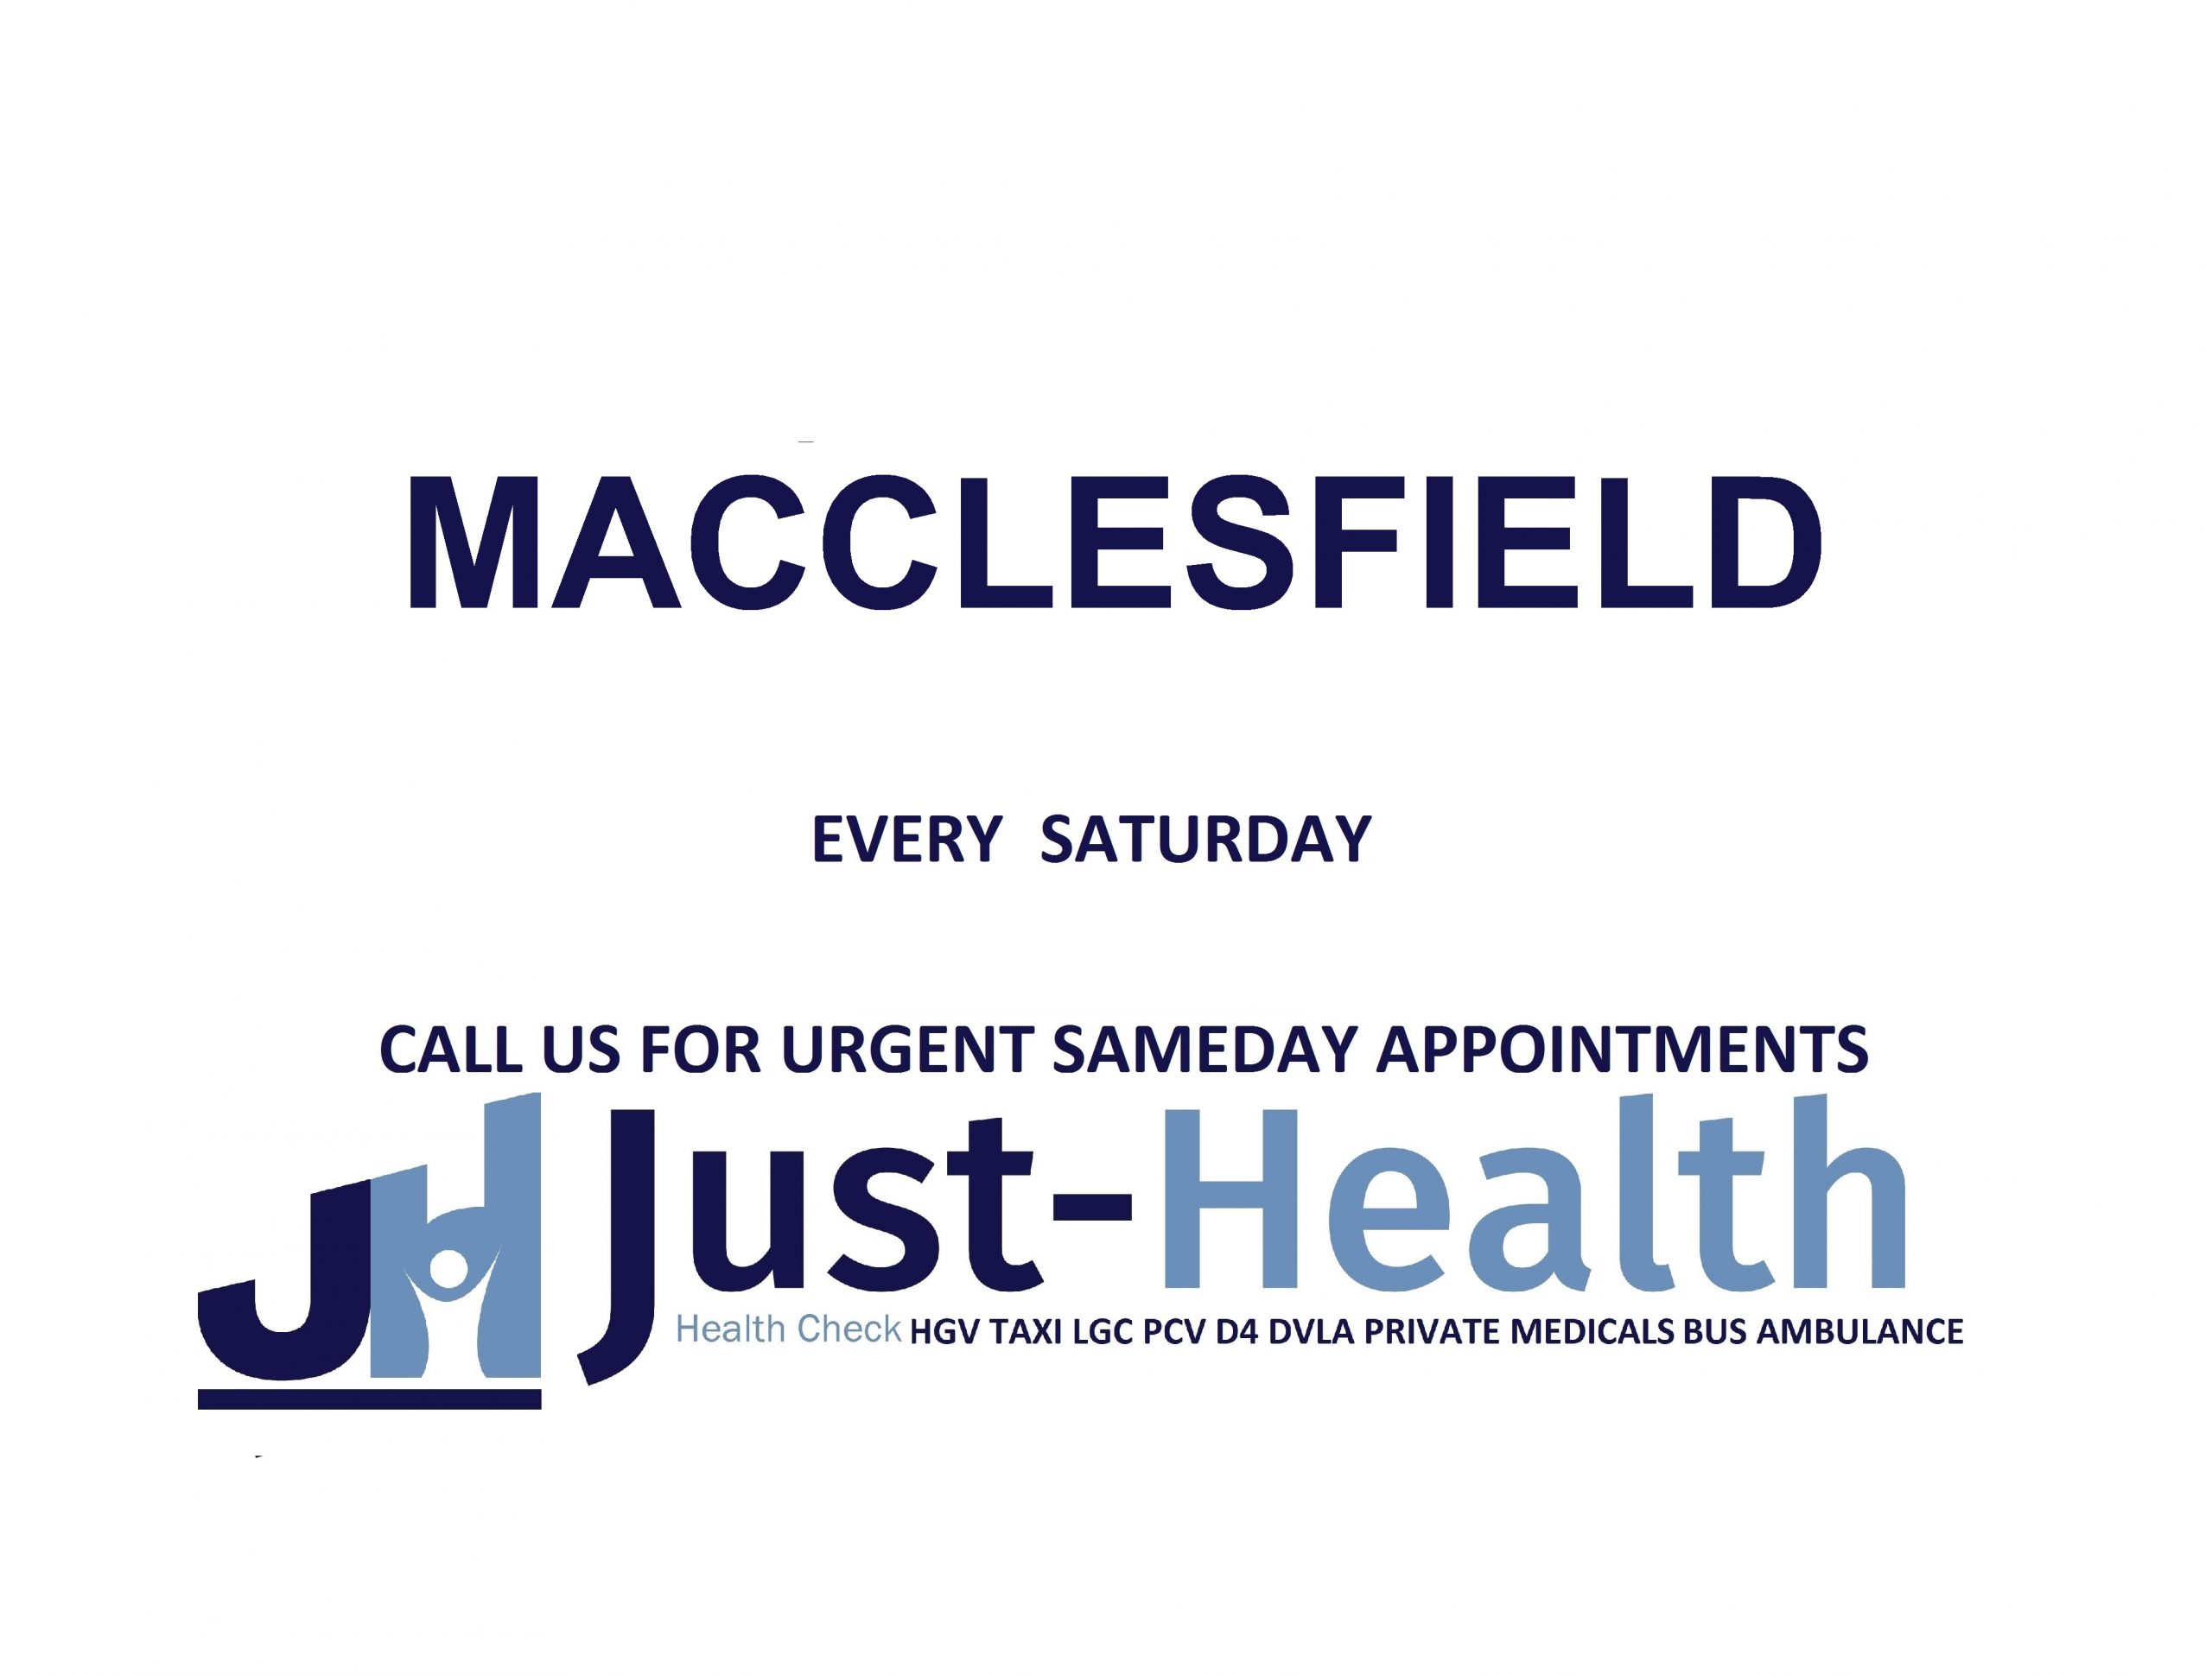 Just Health D4 Medical Southampton Driver Medicals & Private Gp services